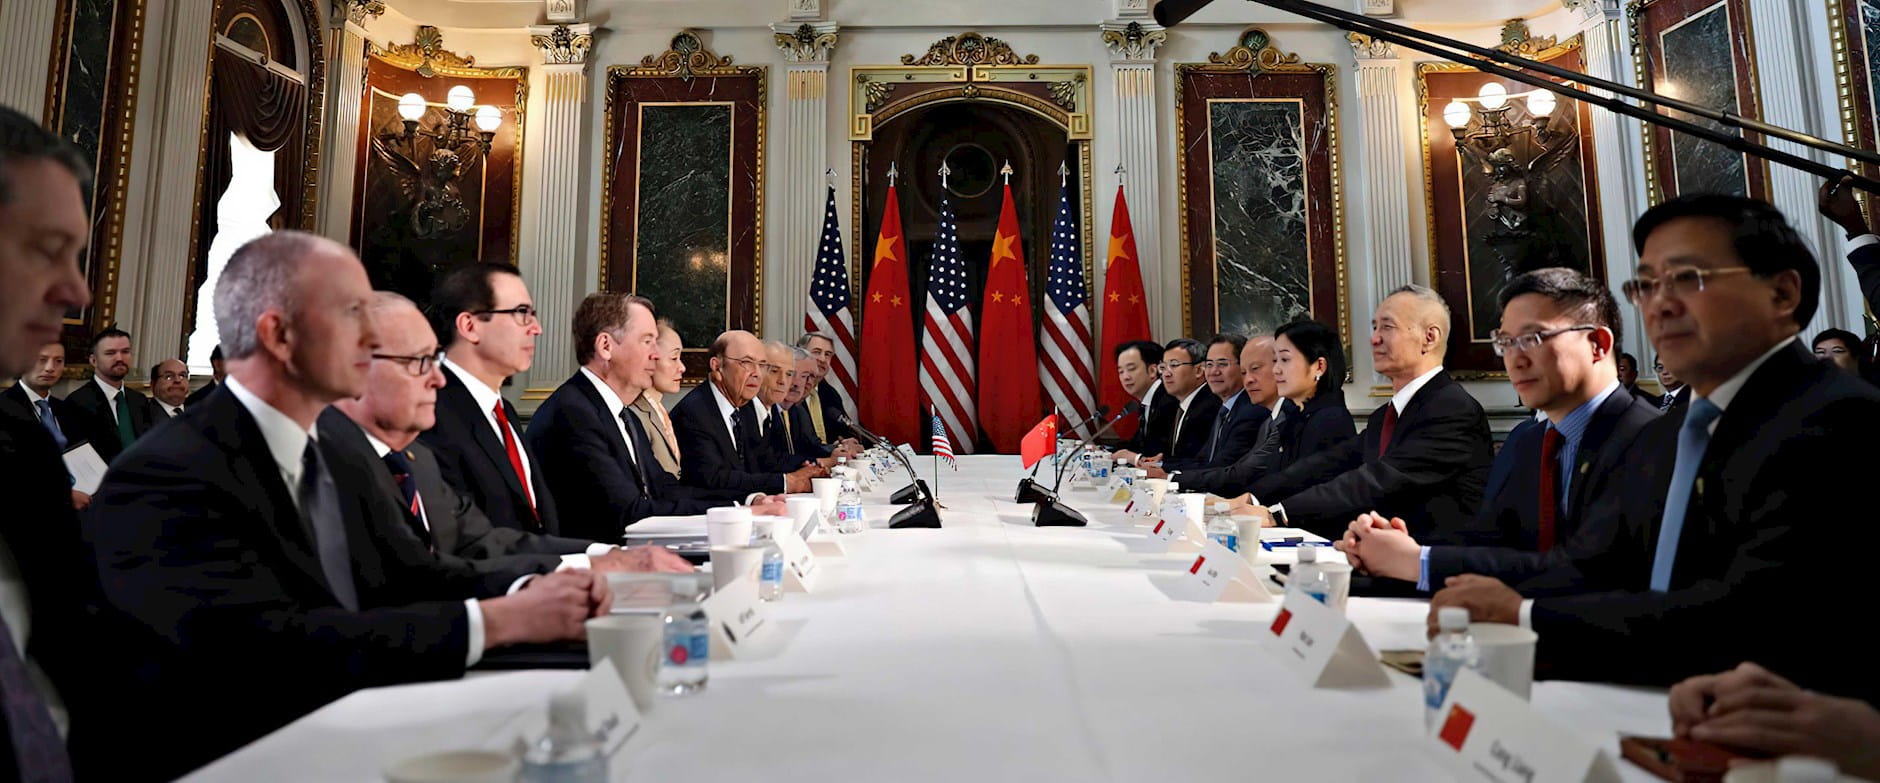 U.S. and Chinese diplomats meet in Indian Treaty Room of the Eisenhower Executive Office Building